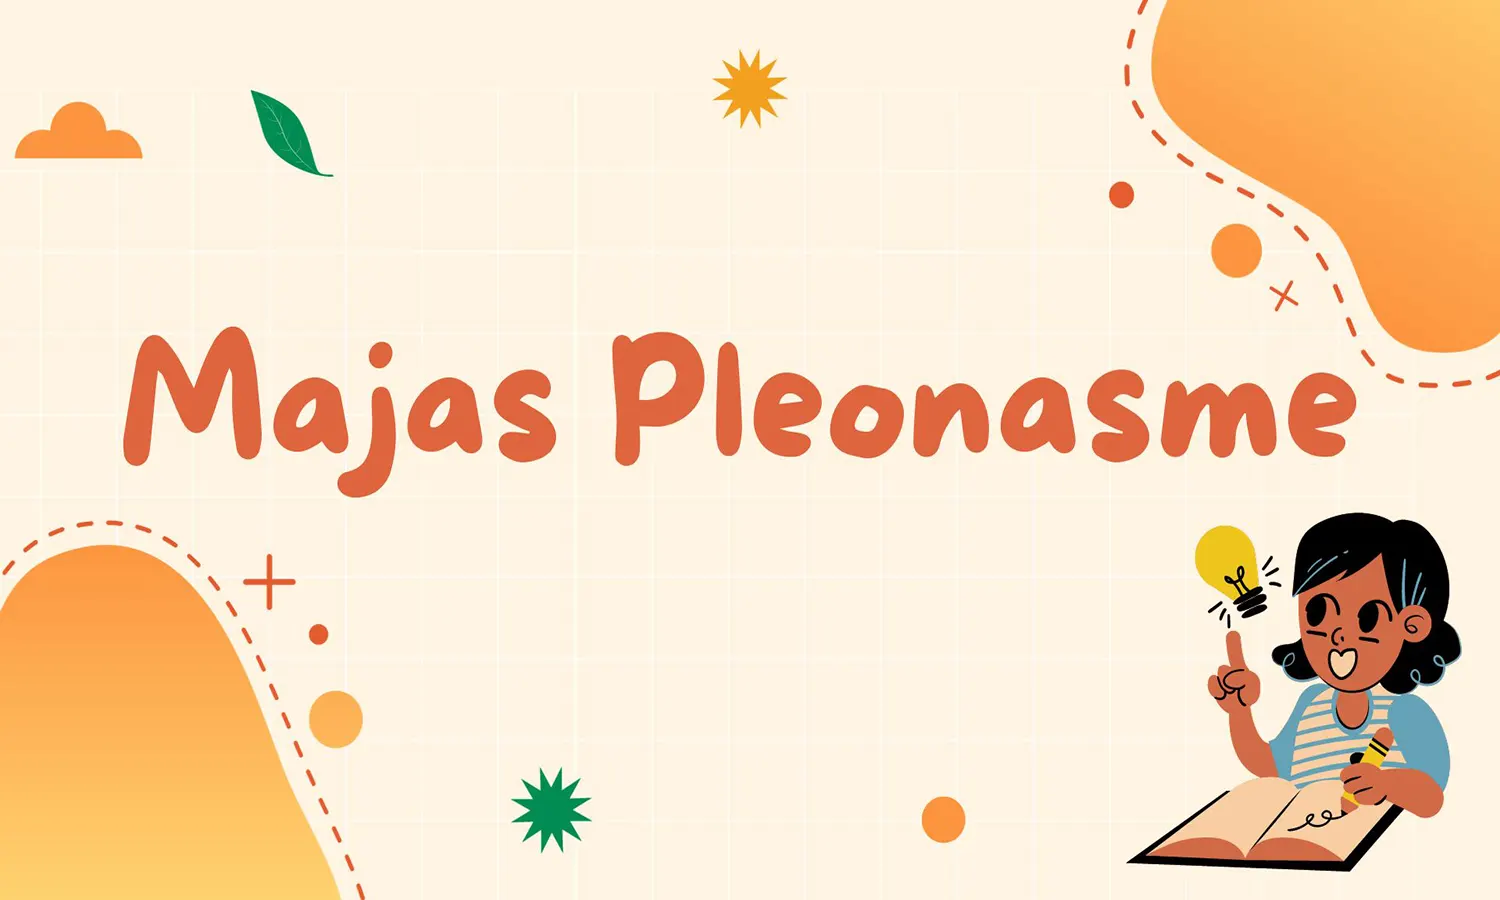 Understand what a pleonasm is, along with its meaning, function, characteristics and examples